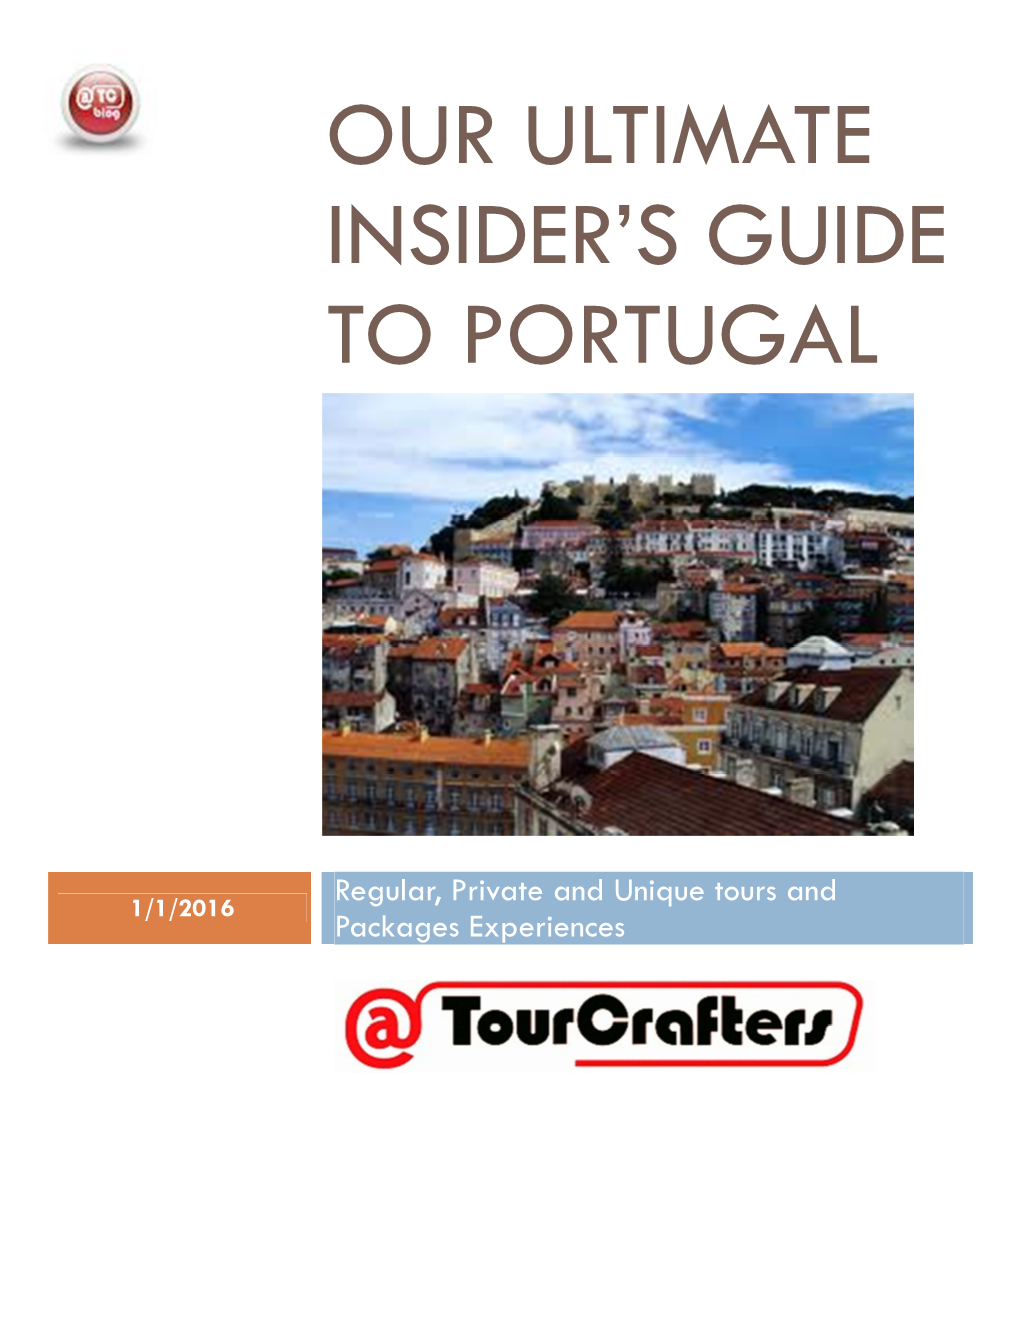 Our Ultimate Insider's Guide to Portugal